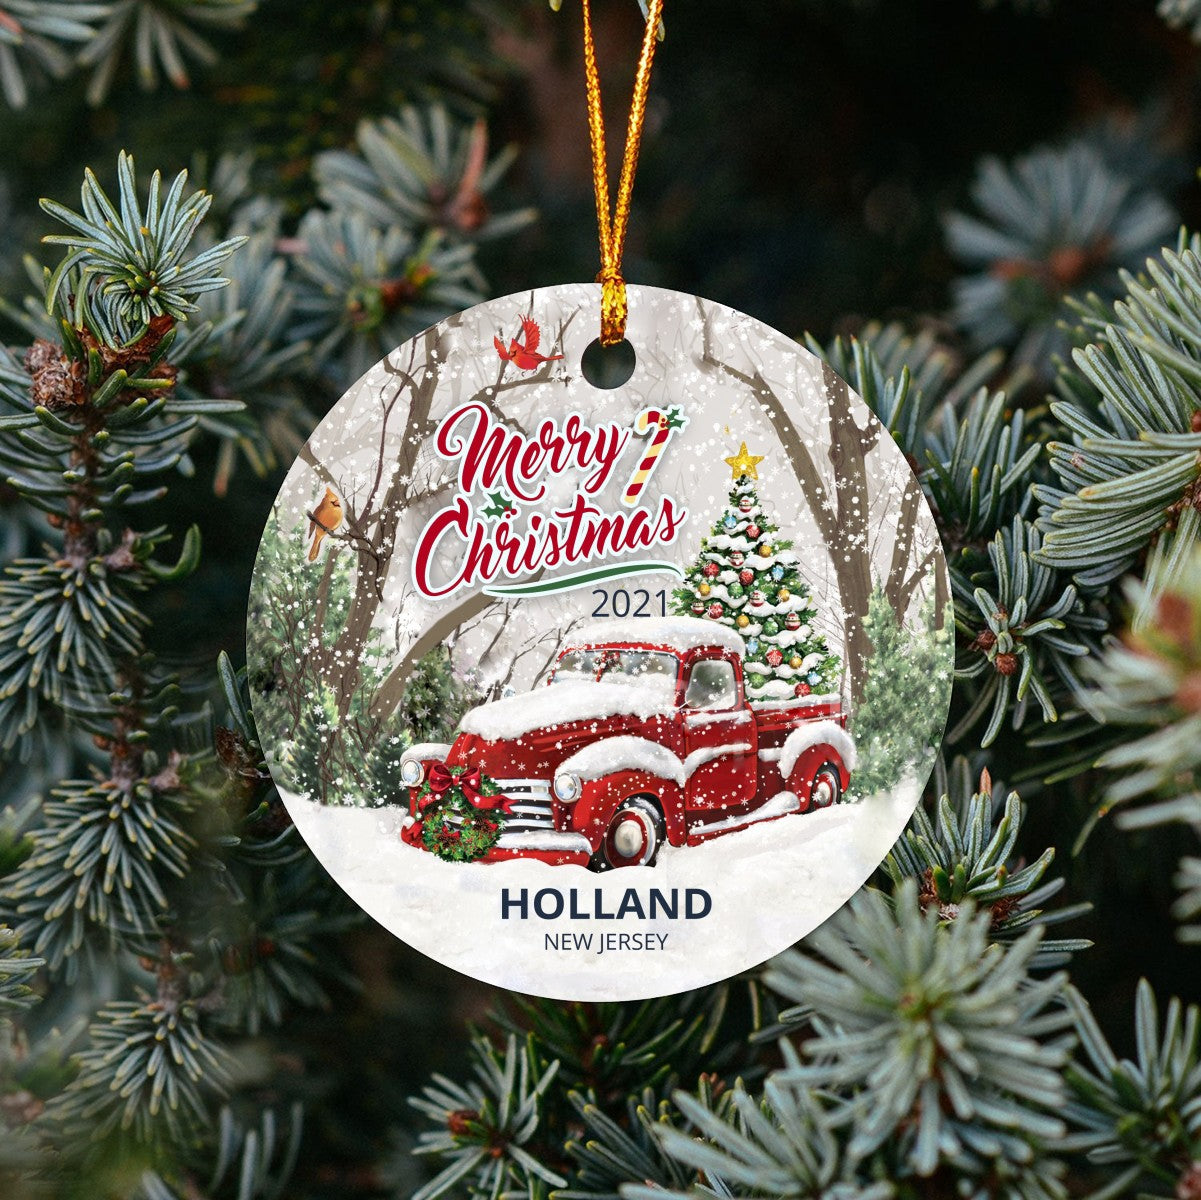 Christmas Tree Ornaments Holland - Ornament With Name City, State Holland New Jersey NJ Ornament - Red Truck Xmas Ornaments 3'' Plastic Gift For Family, Friend And Housewarming